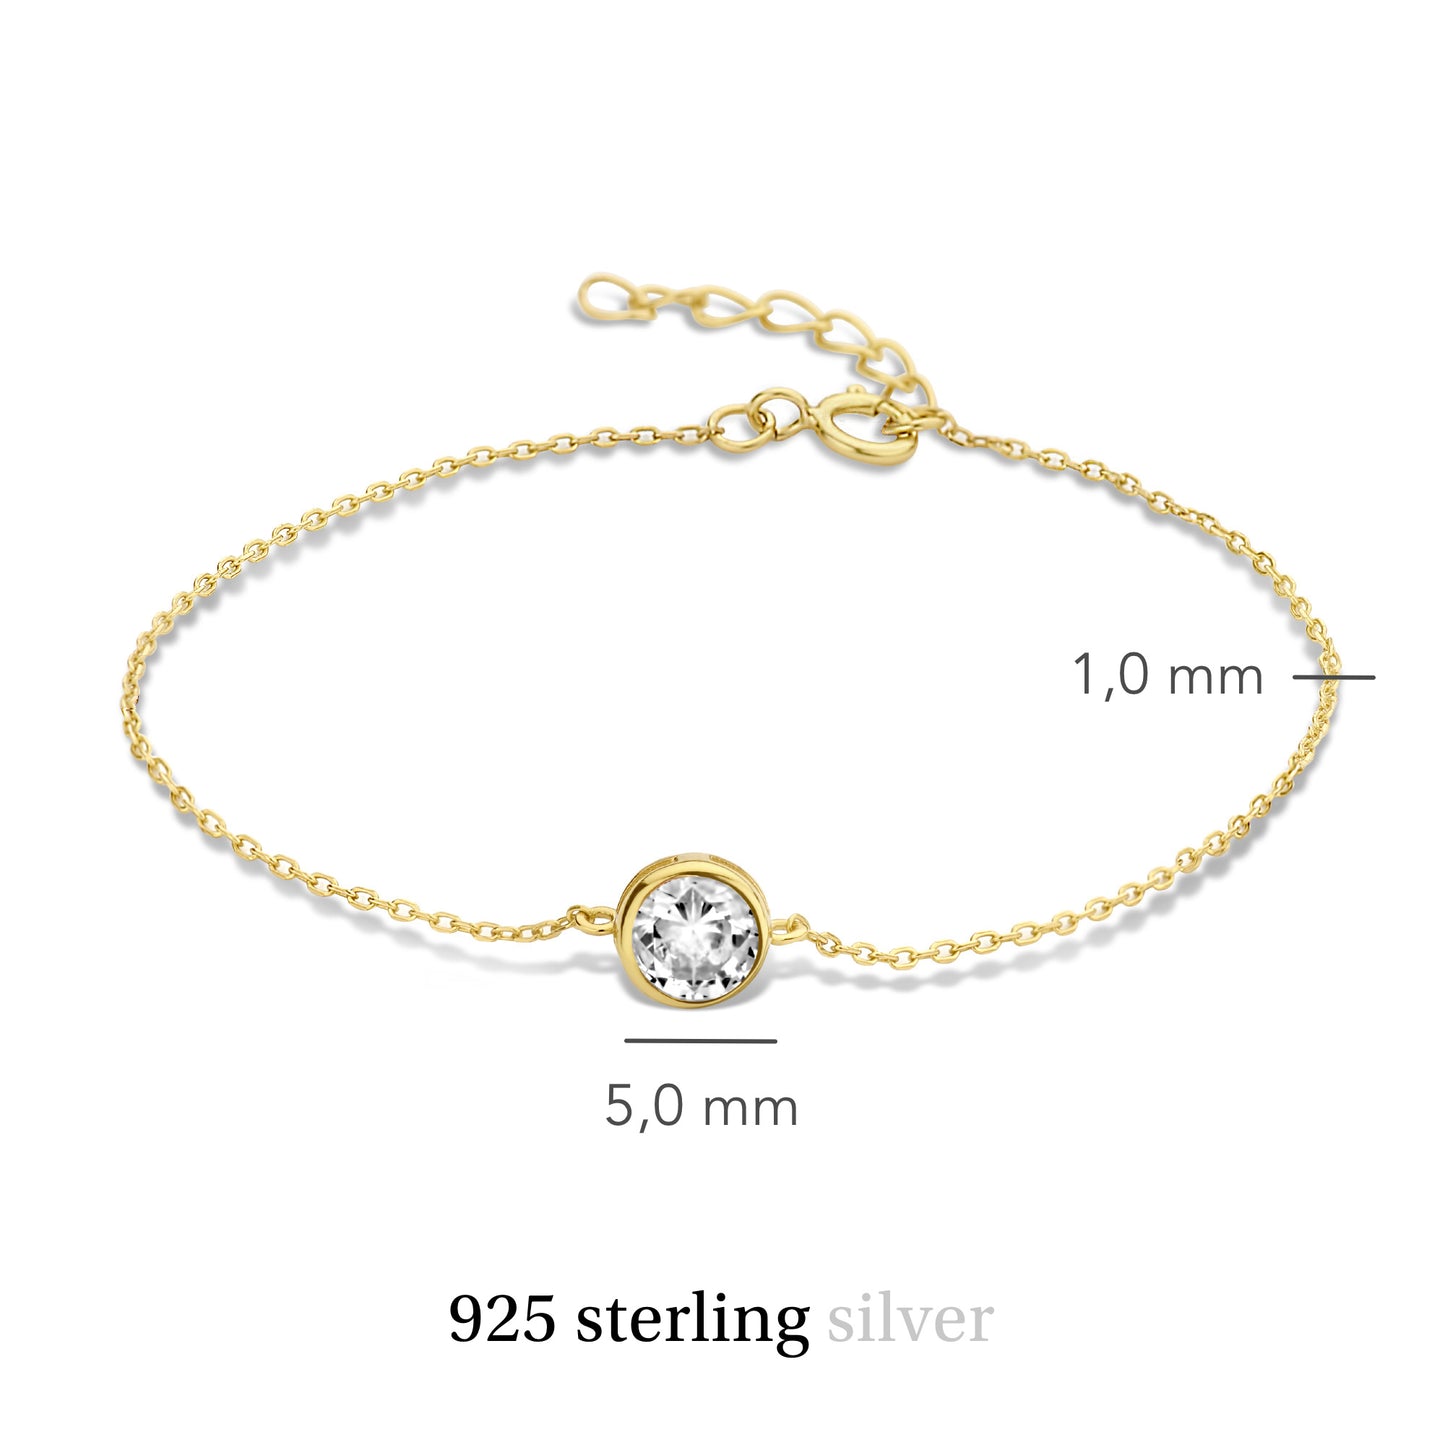 Venus 925 sterling silver gold plated bracelet with birthstone